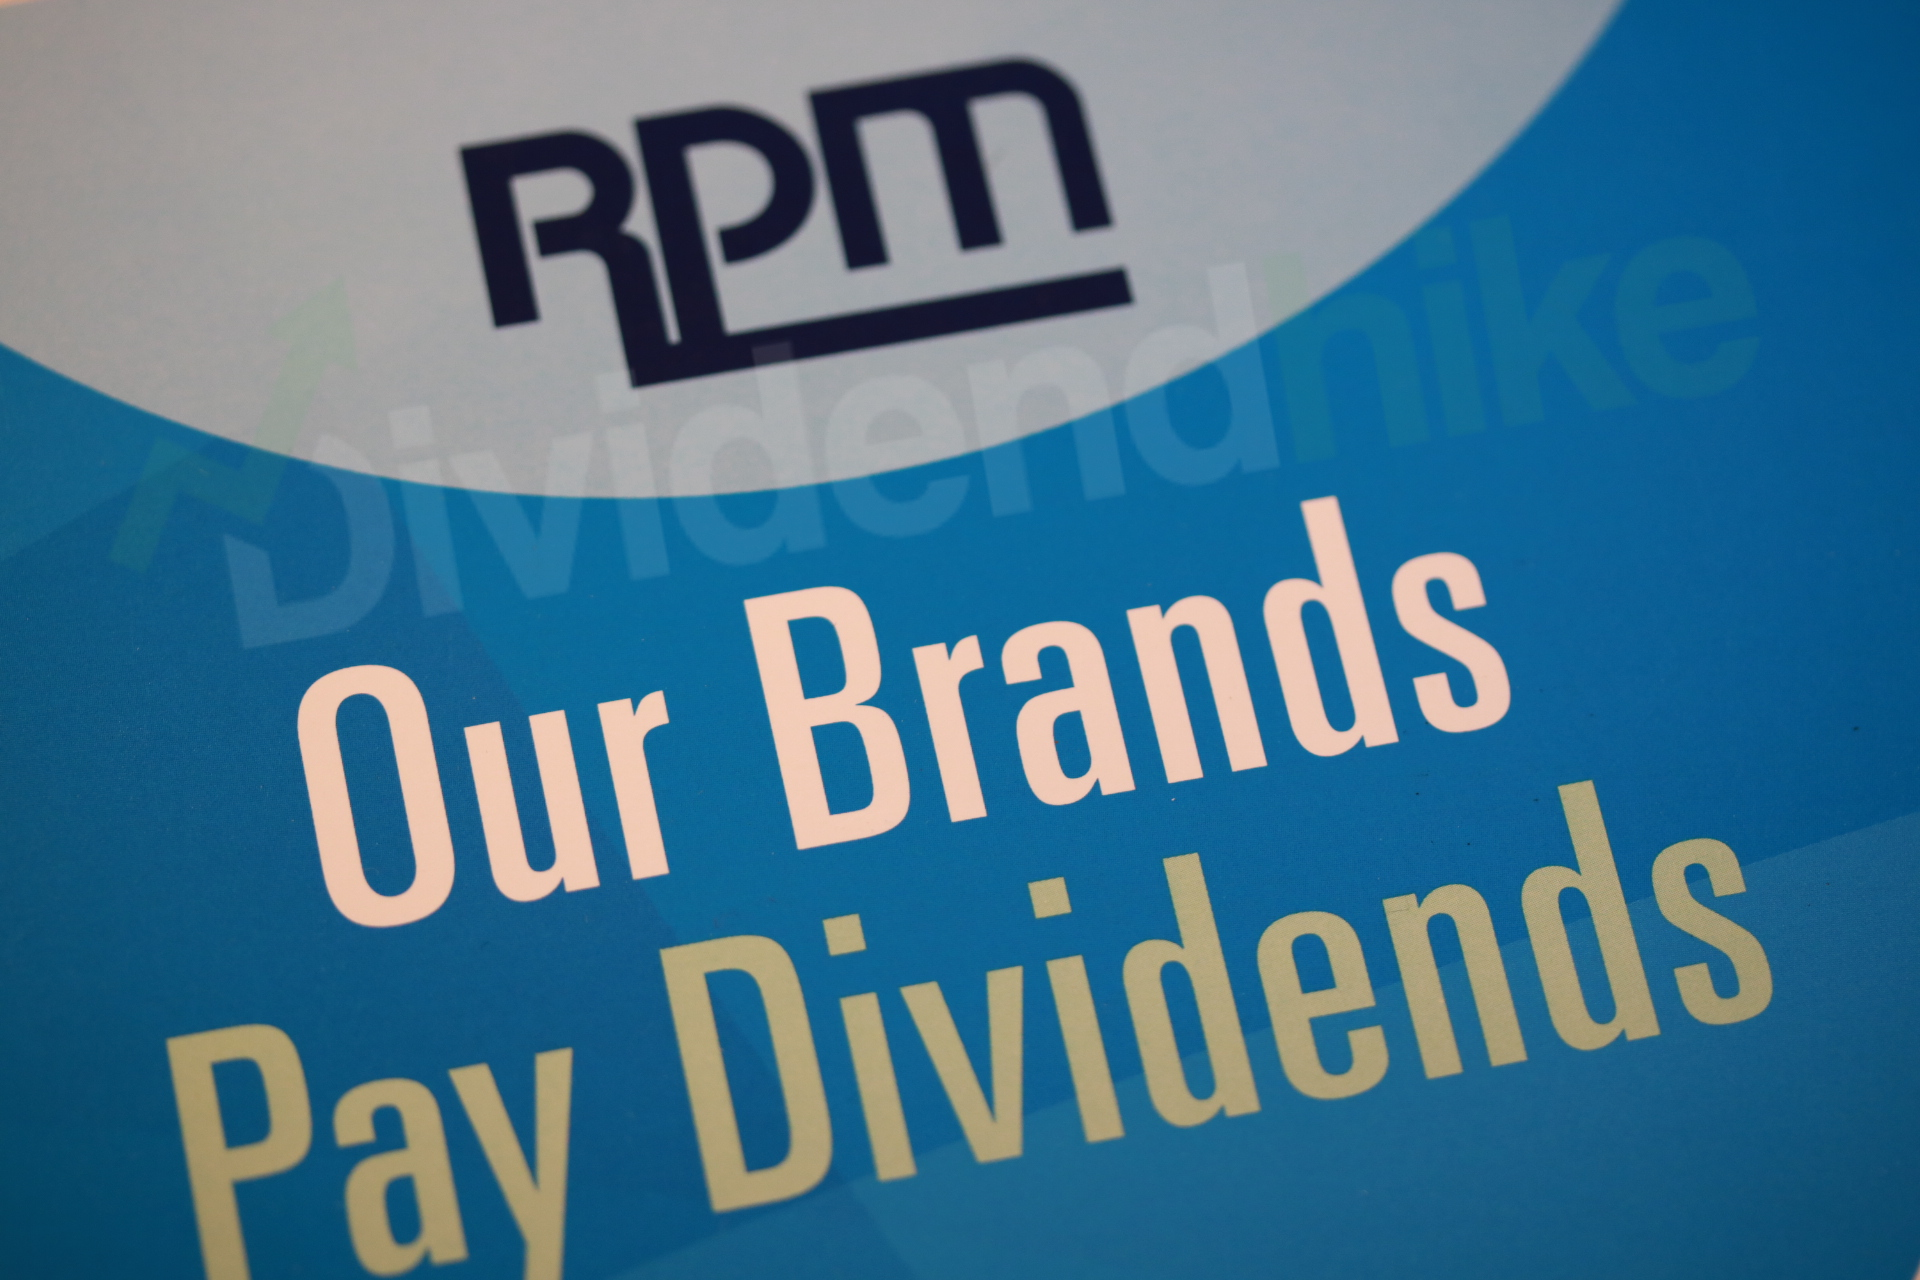 The RPM brands are paying for the dividend | image: dividendhike.com